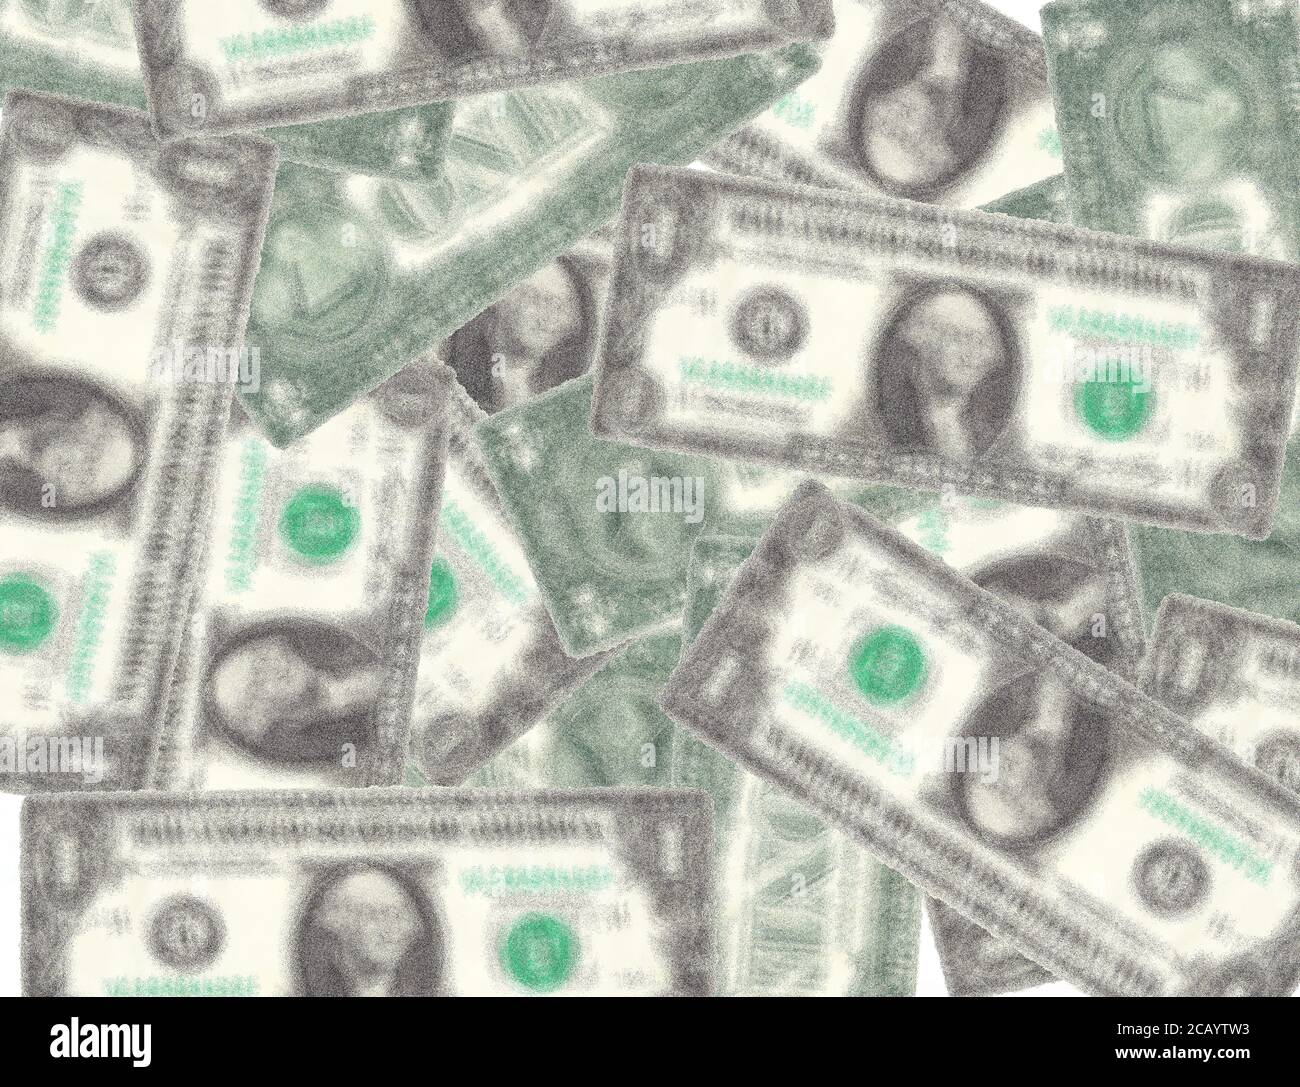 Background Wallpaper Graphic Collage Of Blurred Us Dollar Bills Concept For Money Finance Budget Debt Inflation Stock Photo Alamy